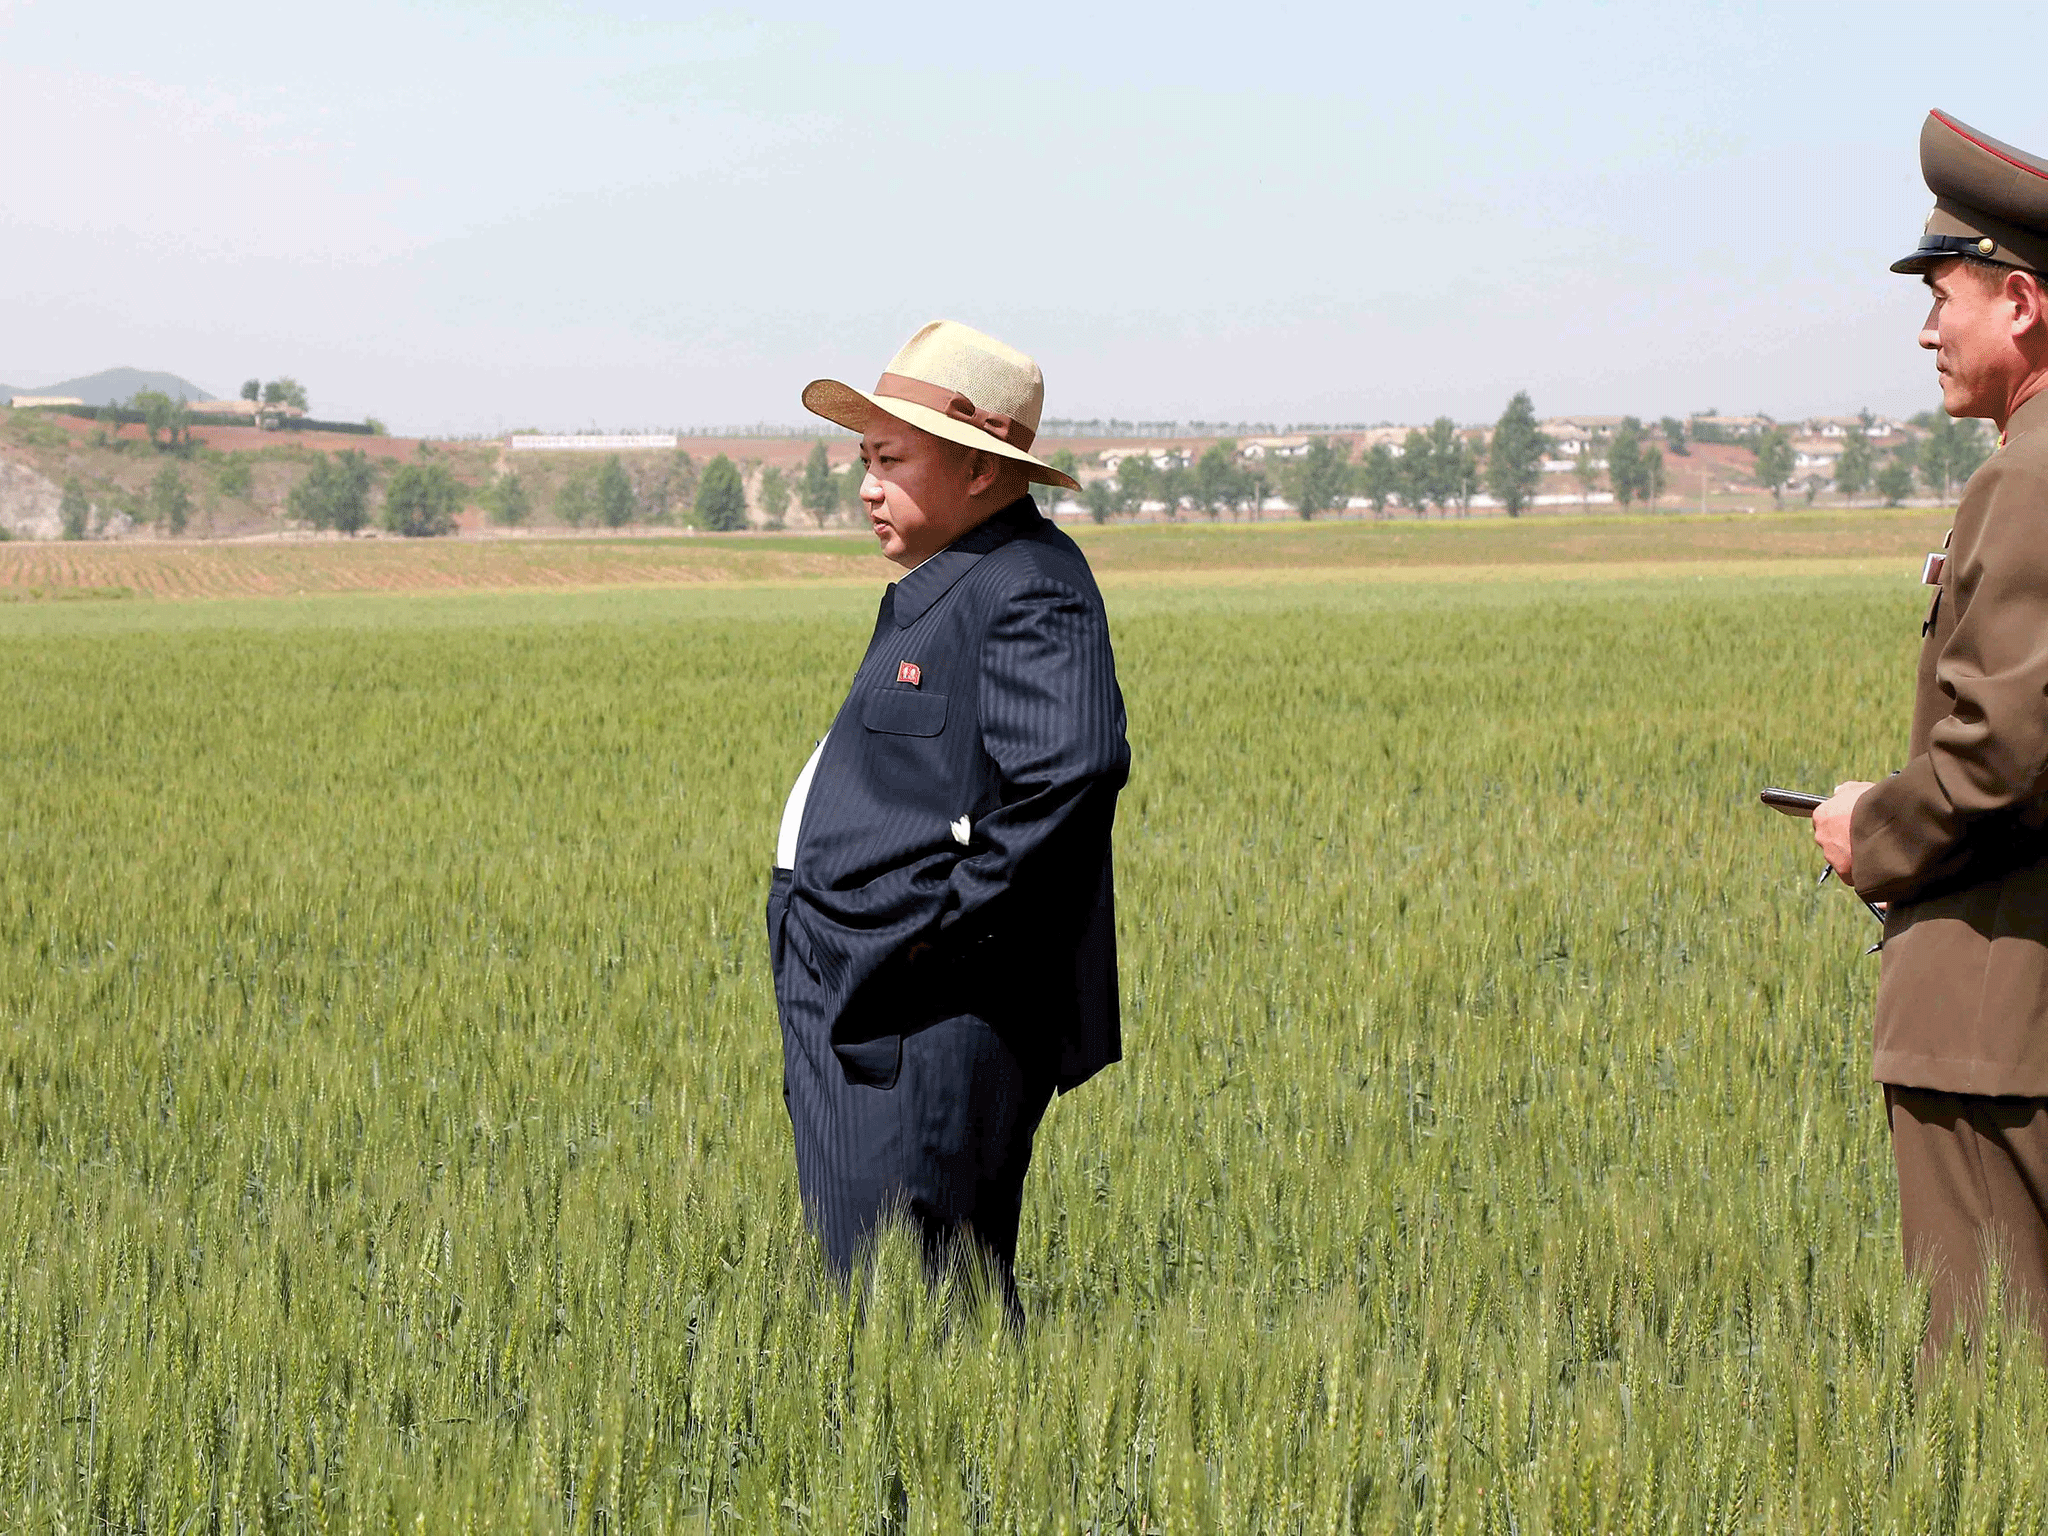 North Korean leader Kim Jong Un visits Farm No. 1116, under KPA (Korean People's Army) Unit 810, in this undated file photo released by North Korea's Korean Central News Agency